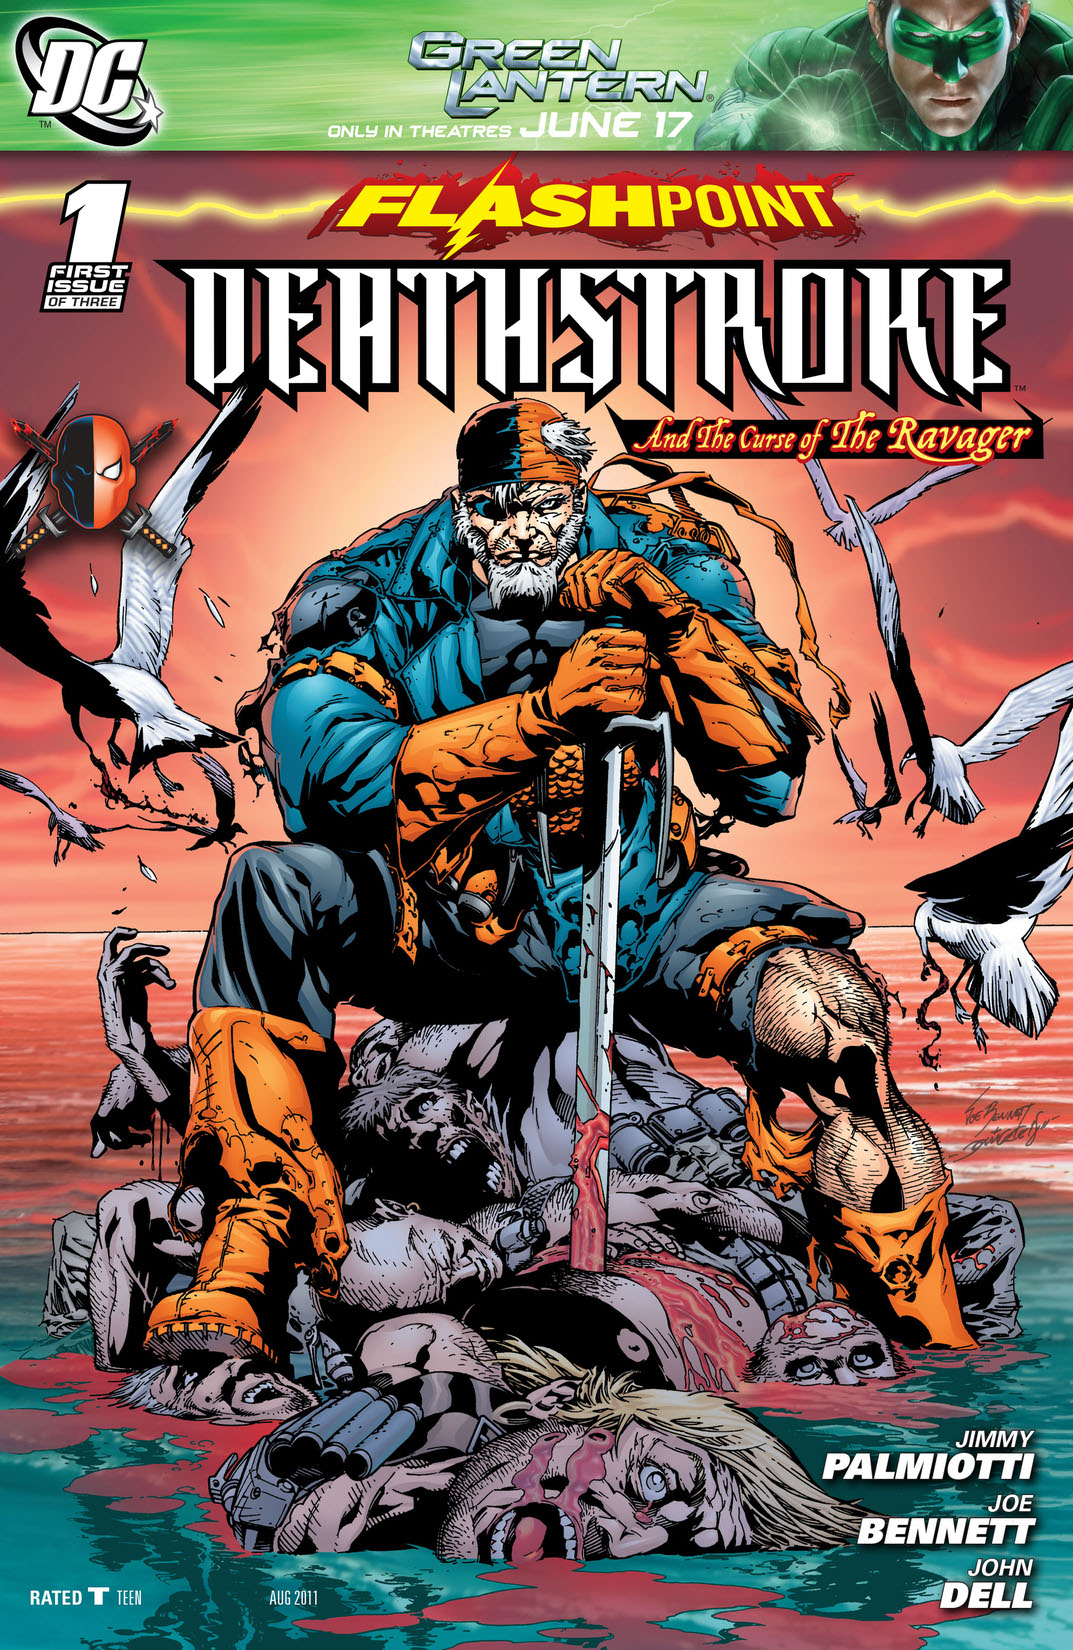 Flashpoint: Deathstroke & the Curse of the Ravager #1 preview images